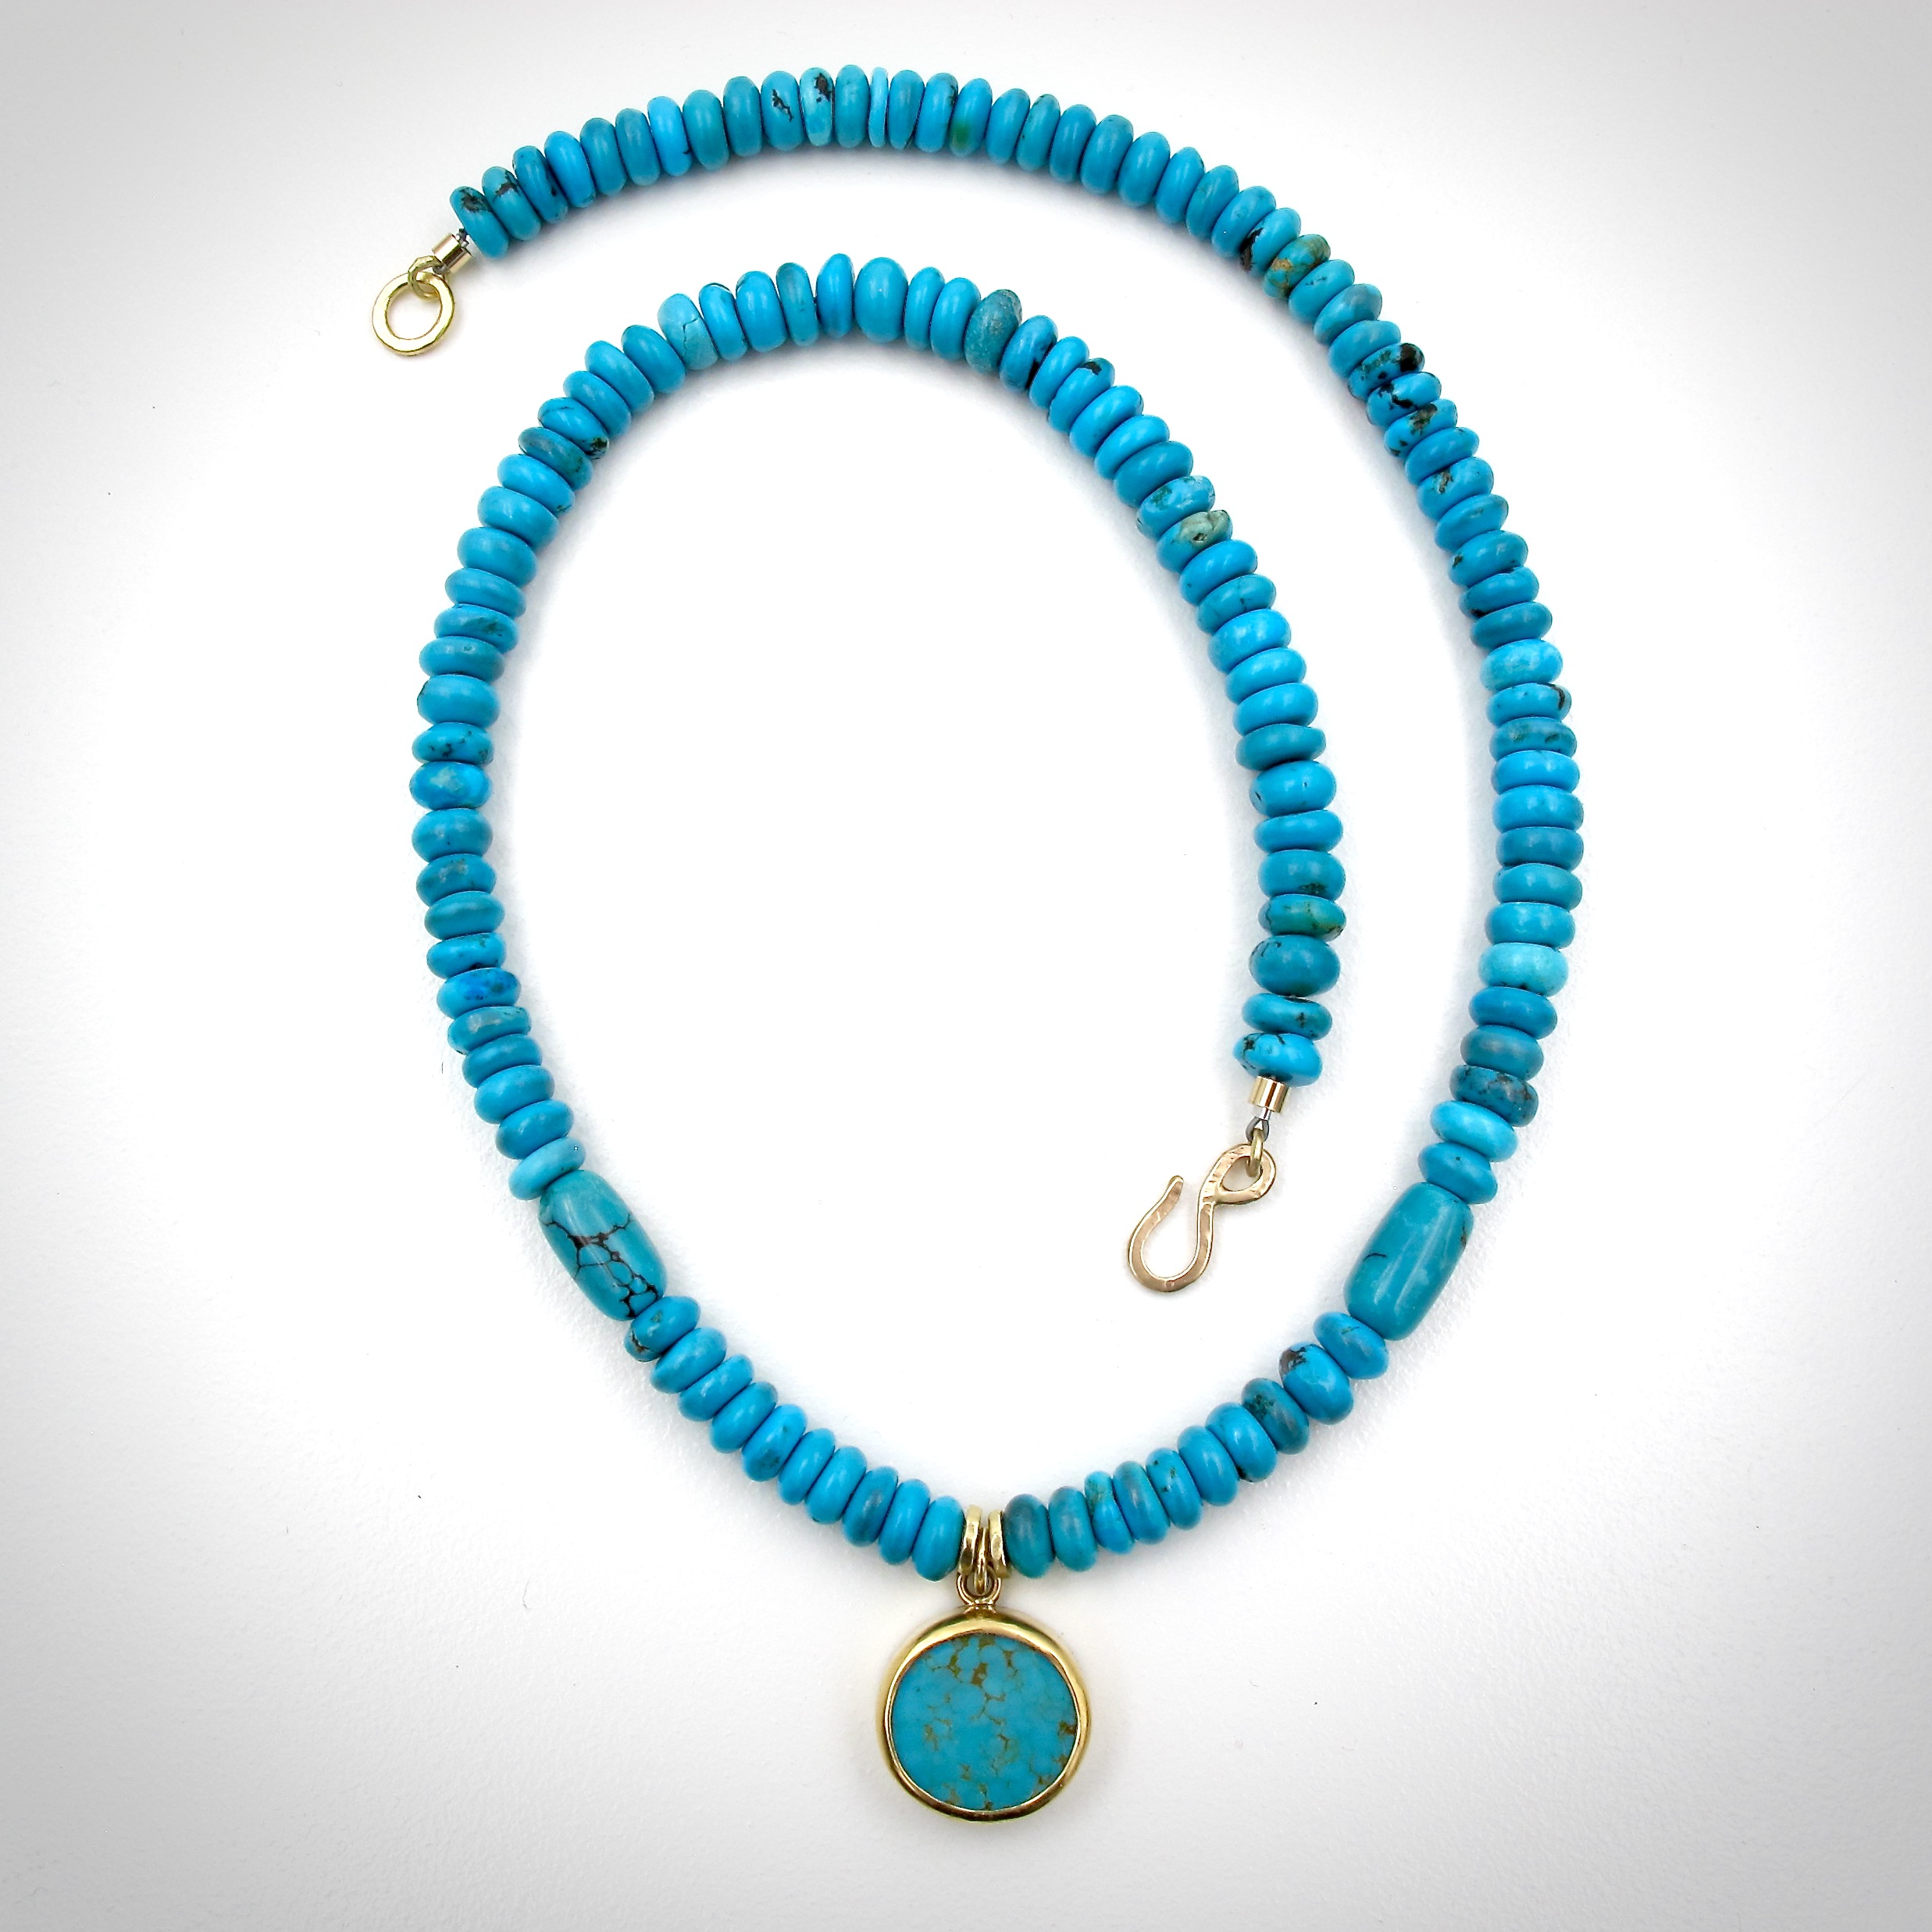 Turquoise, gold, jewelry, necklace